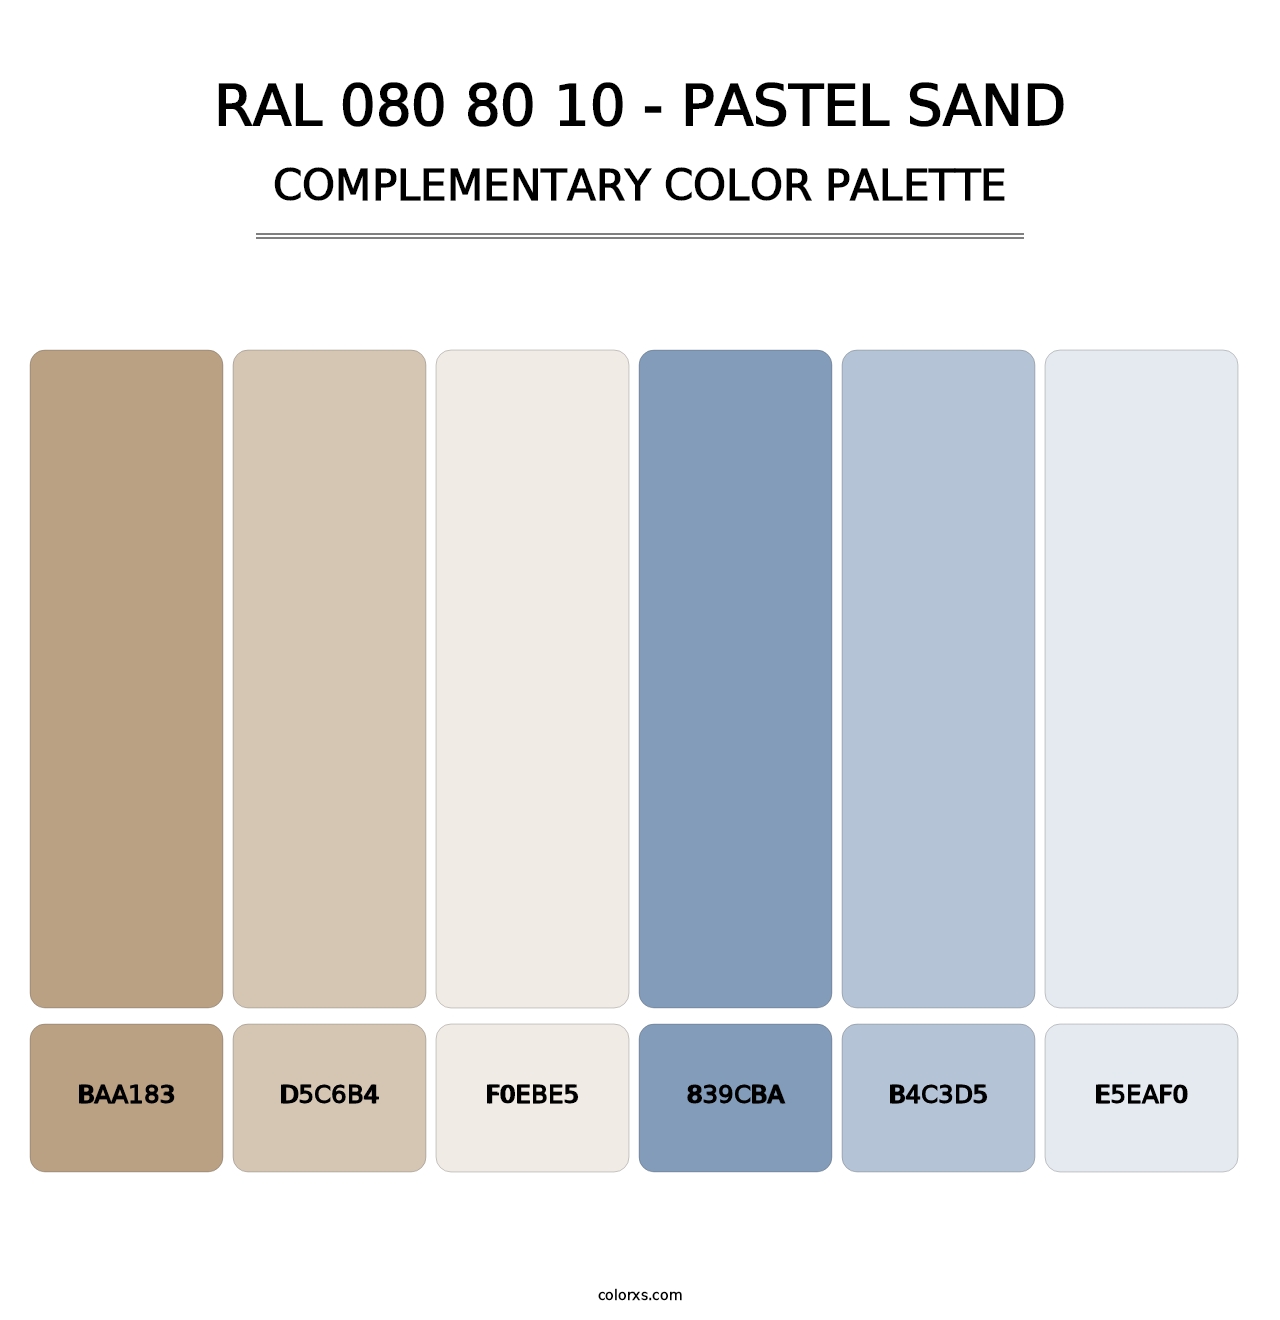 RAL 080 80 10 - Pastel Sand - Complementary Color Palette